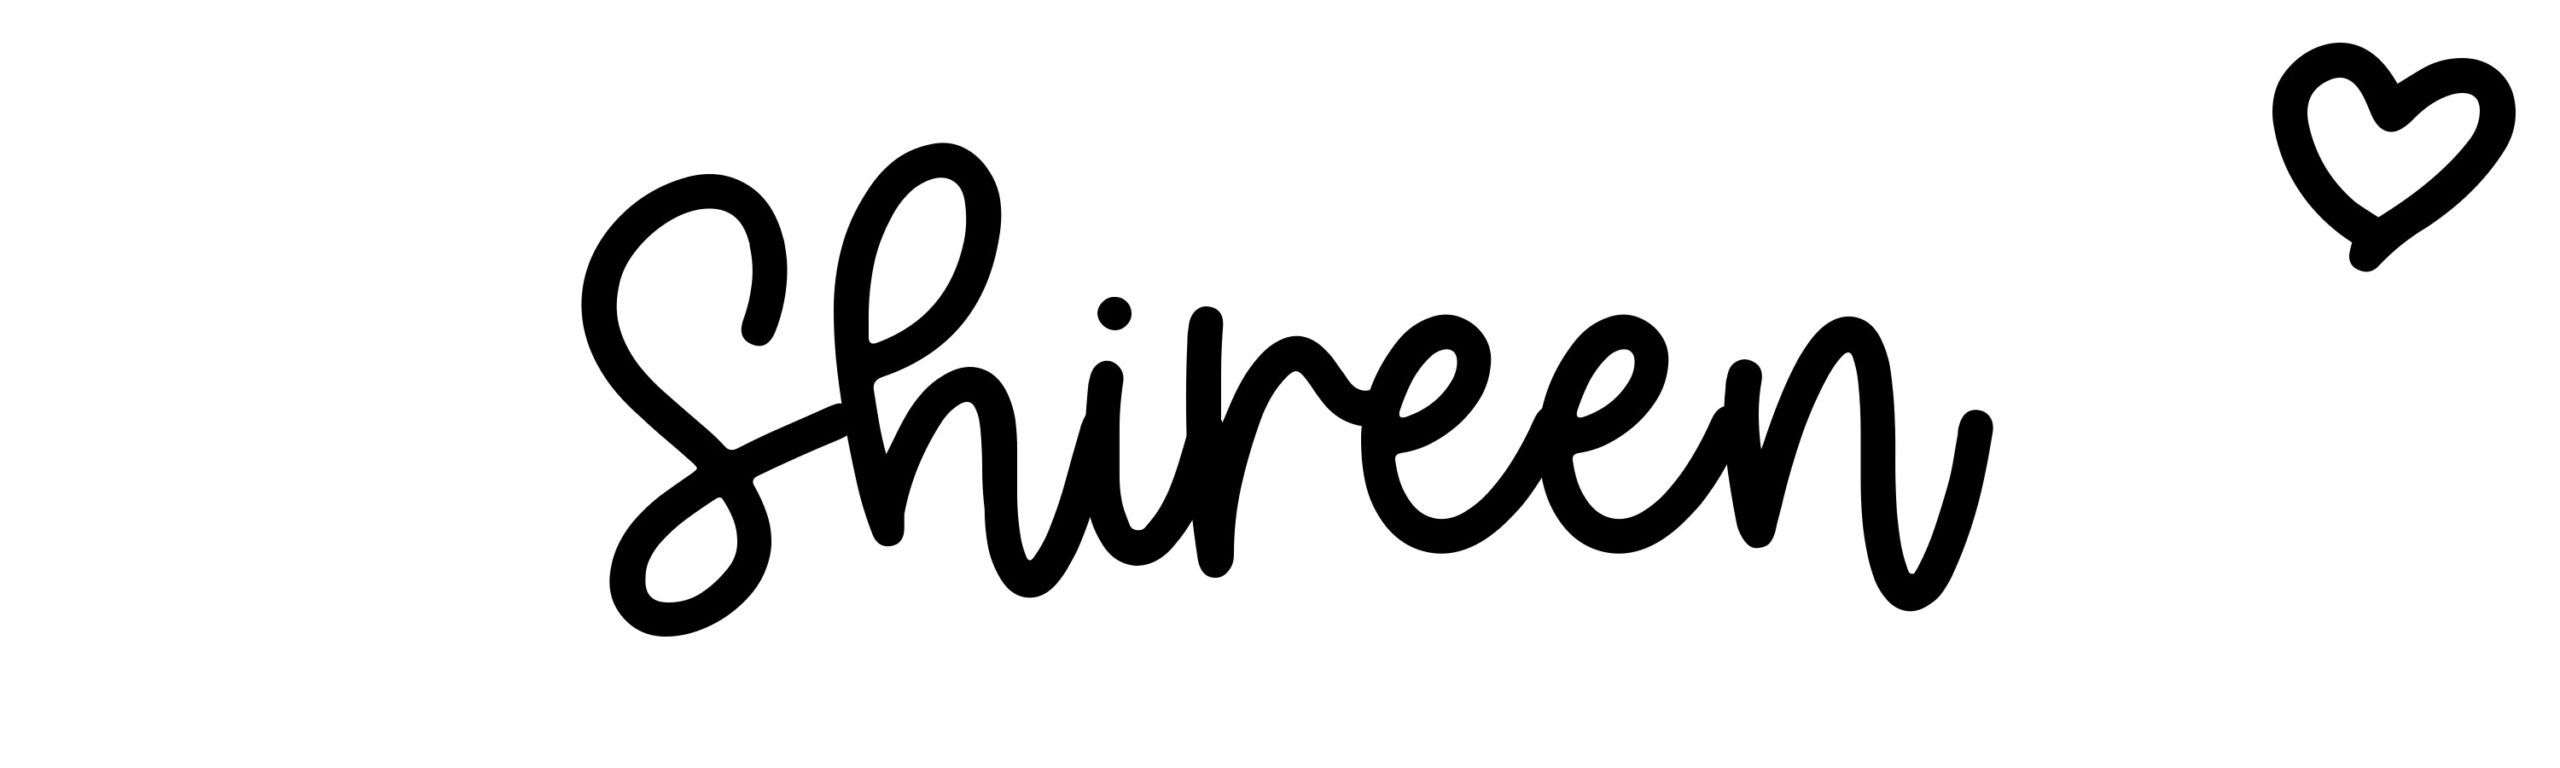 Shireen - Name meaning, origin, variations and more